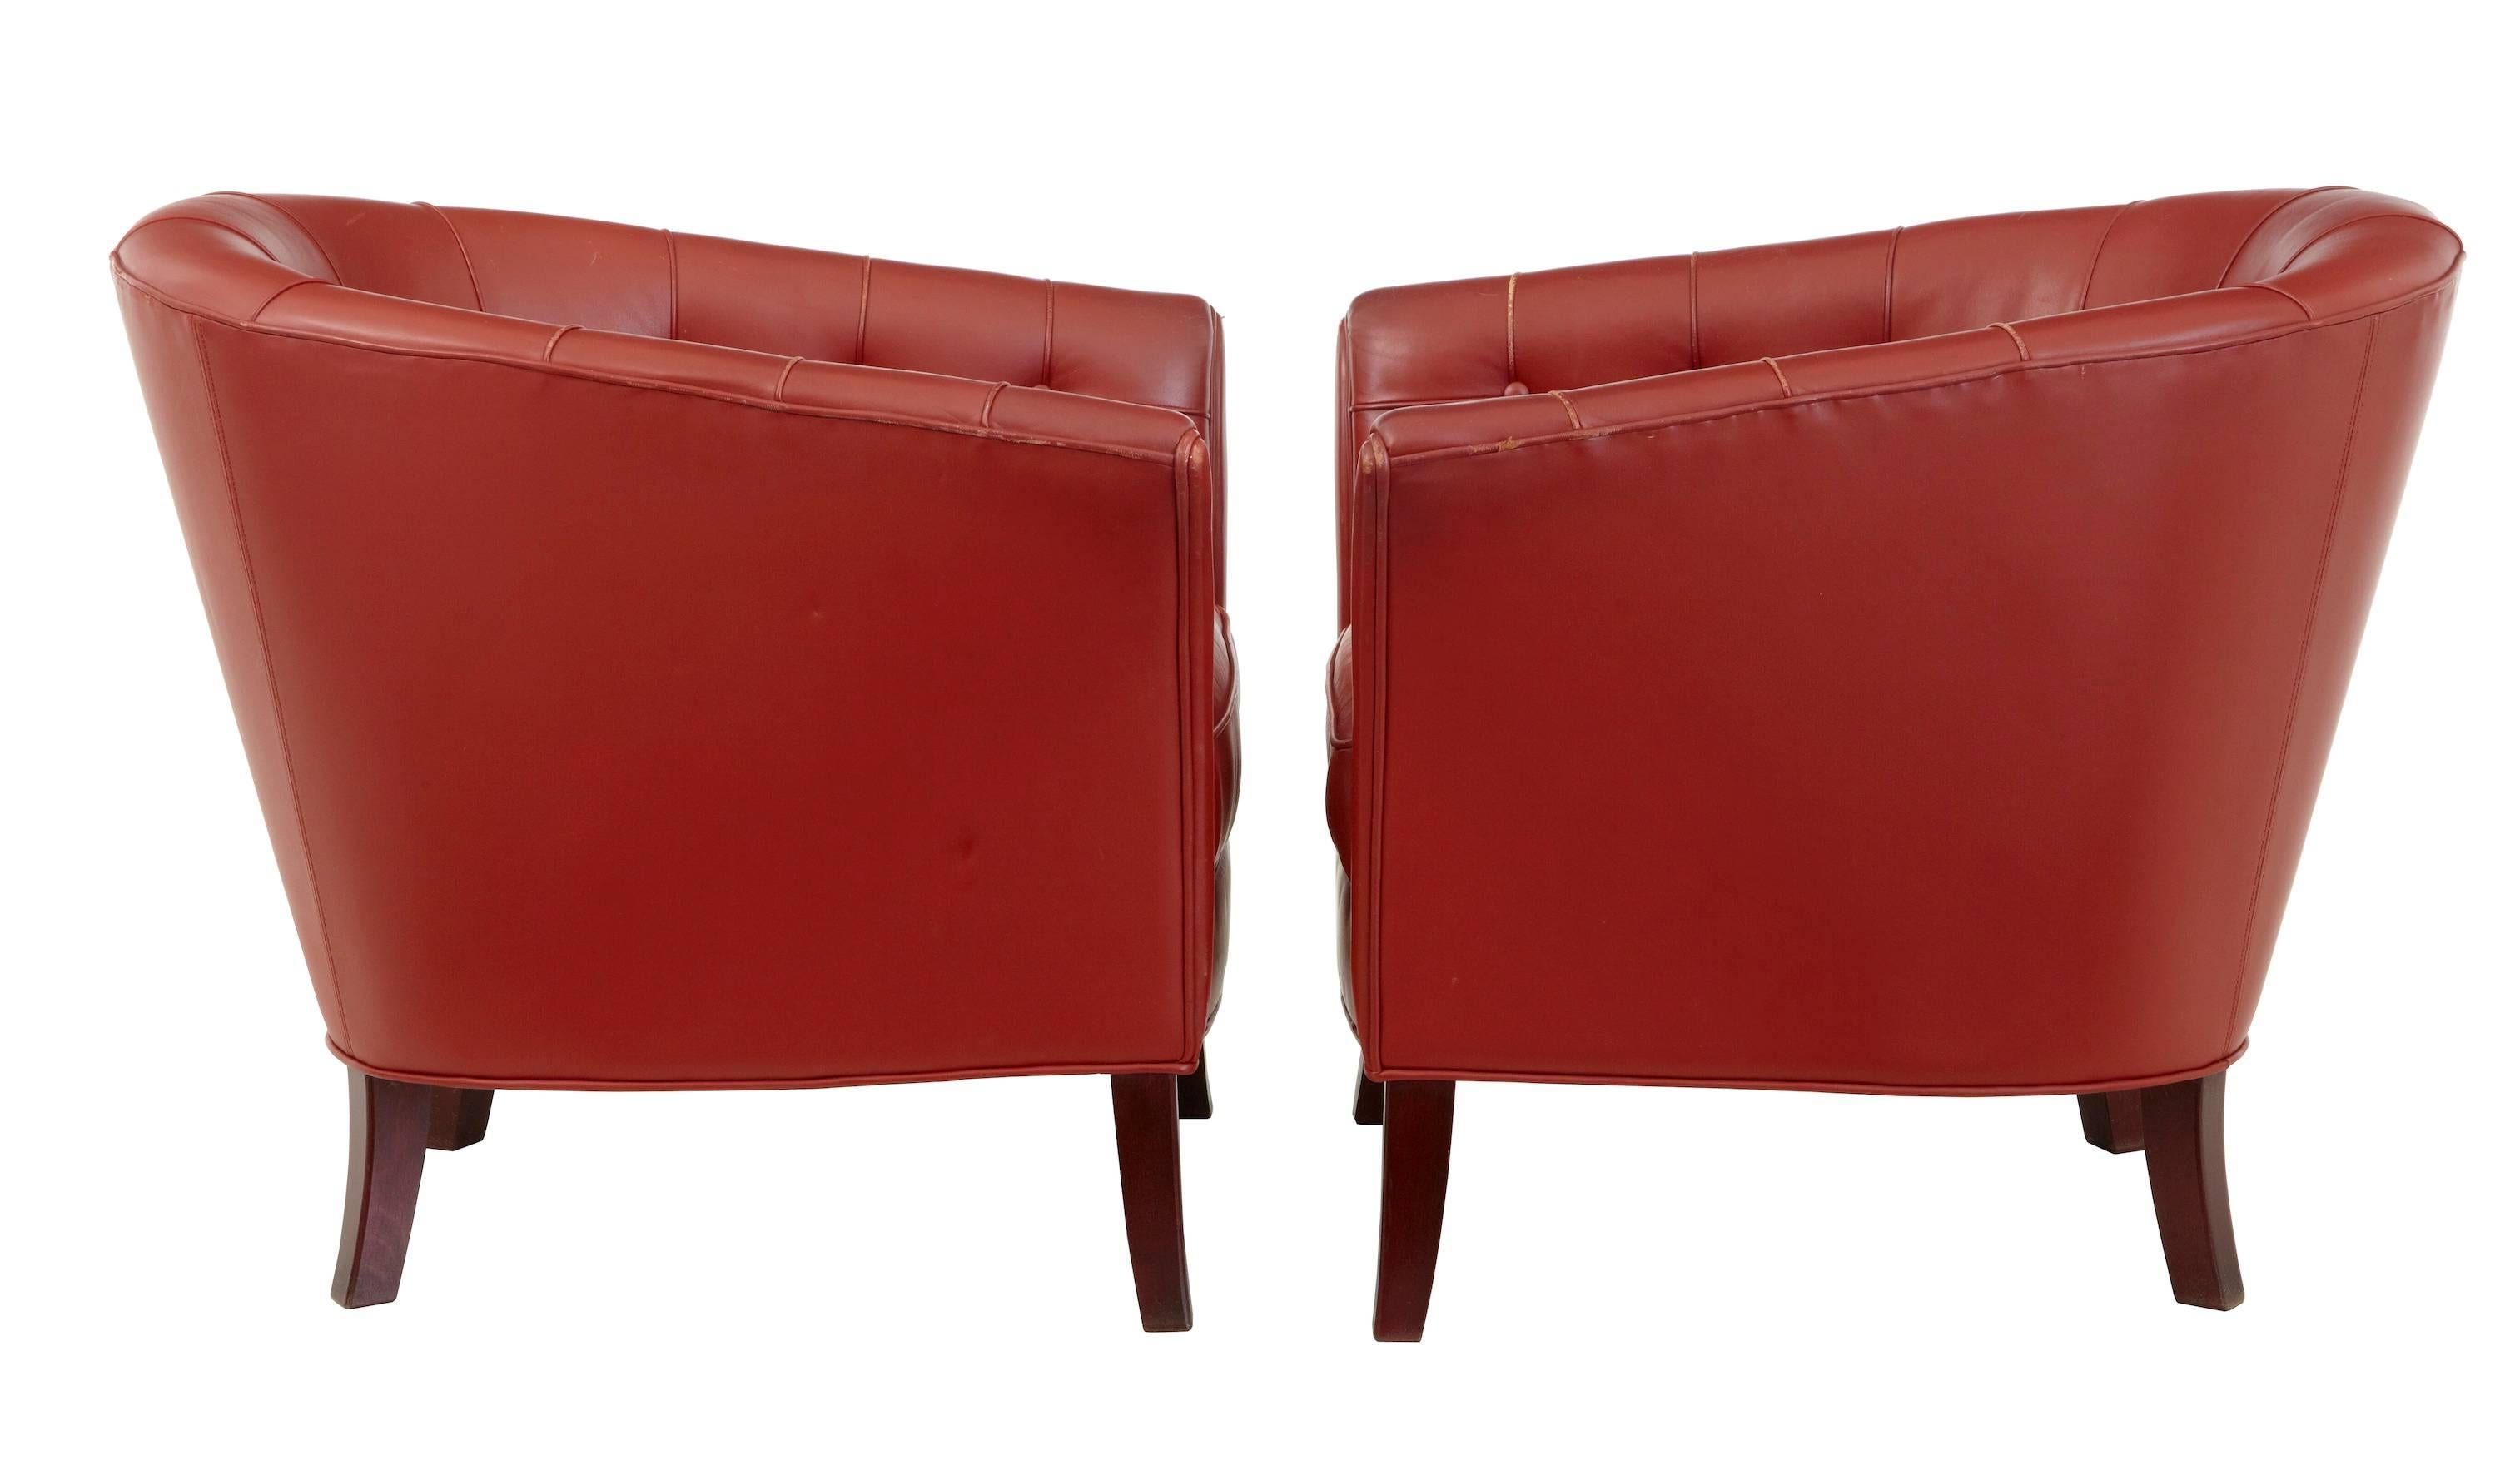 
Good quality and very comfortable pair of 1970s armchairs.
Rusty red colored leather with piping and buttonback.
Standing on mahogany colored tapering legs.

Some wear to piping and minor scuffs around the outside (photographed).

Armchair